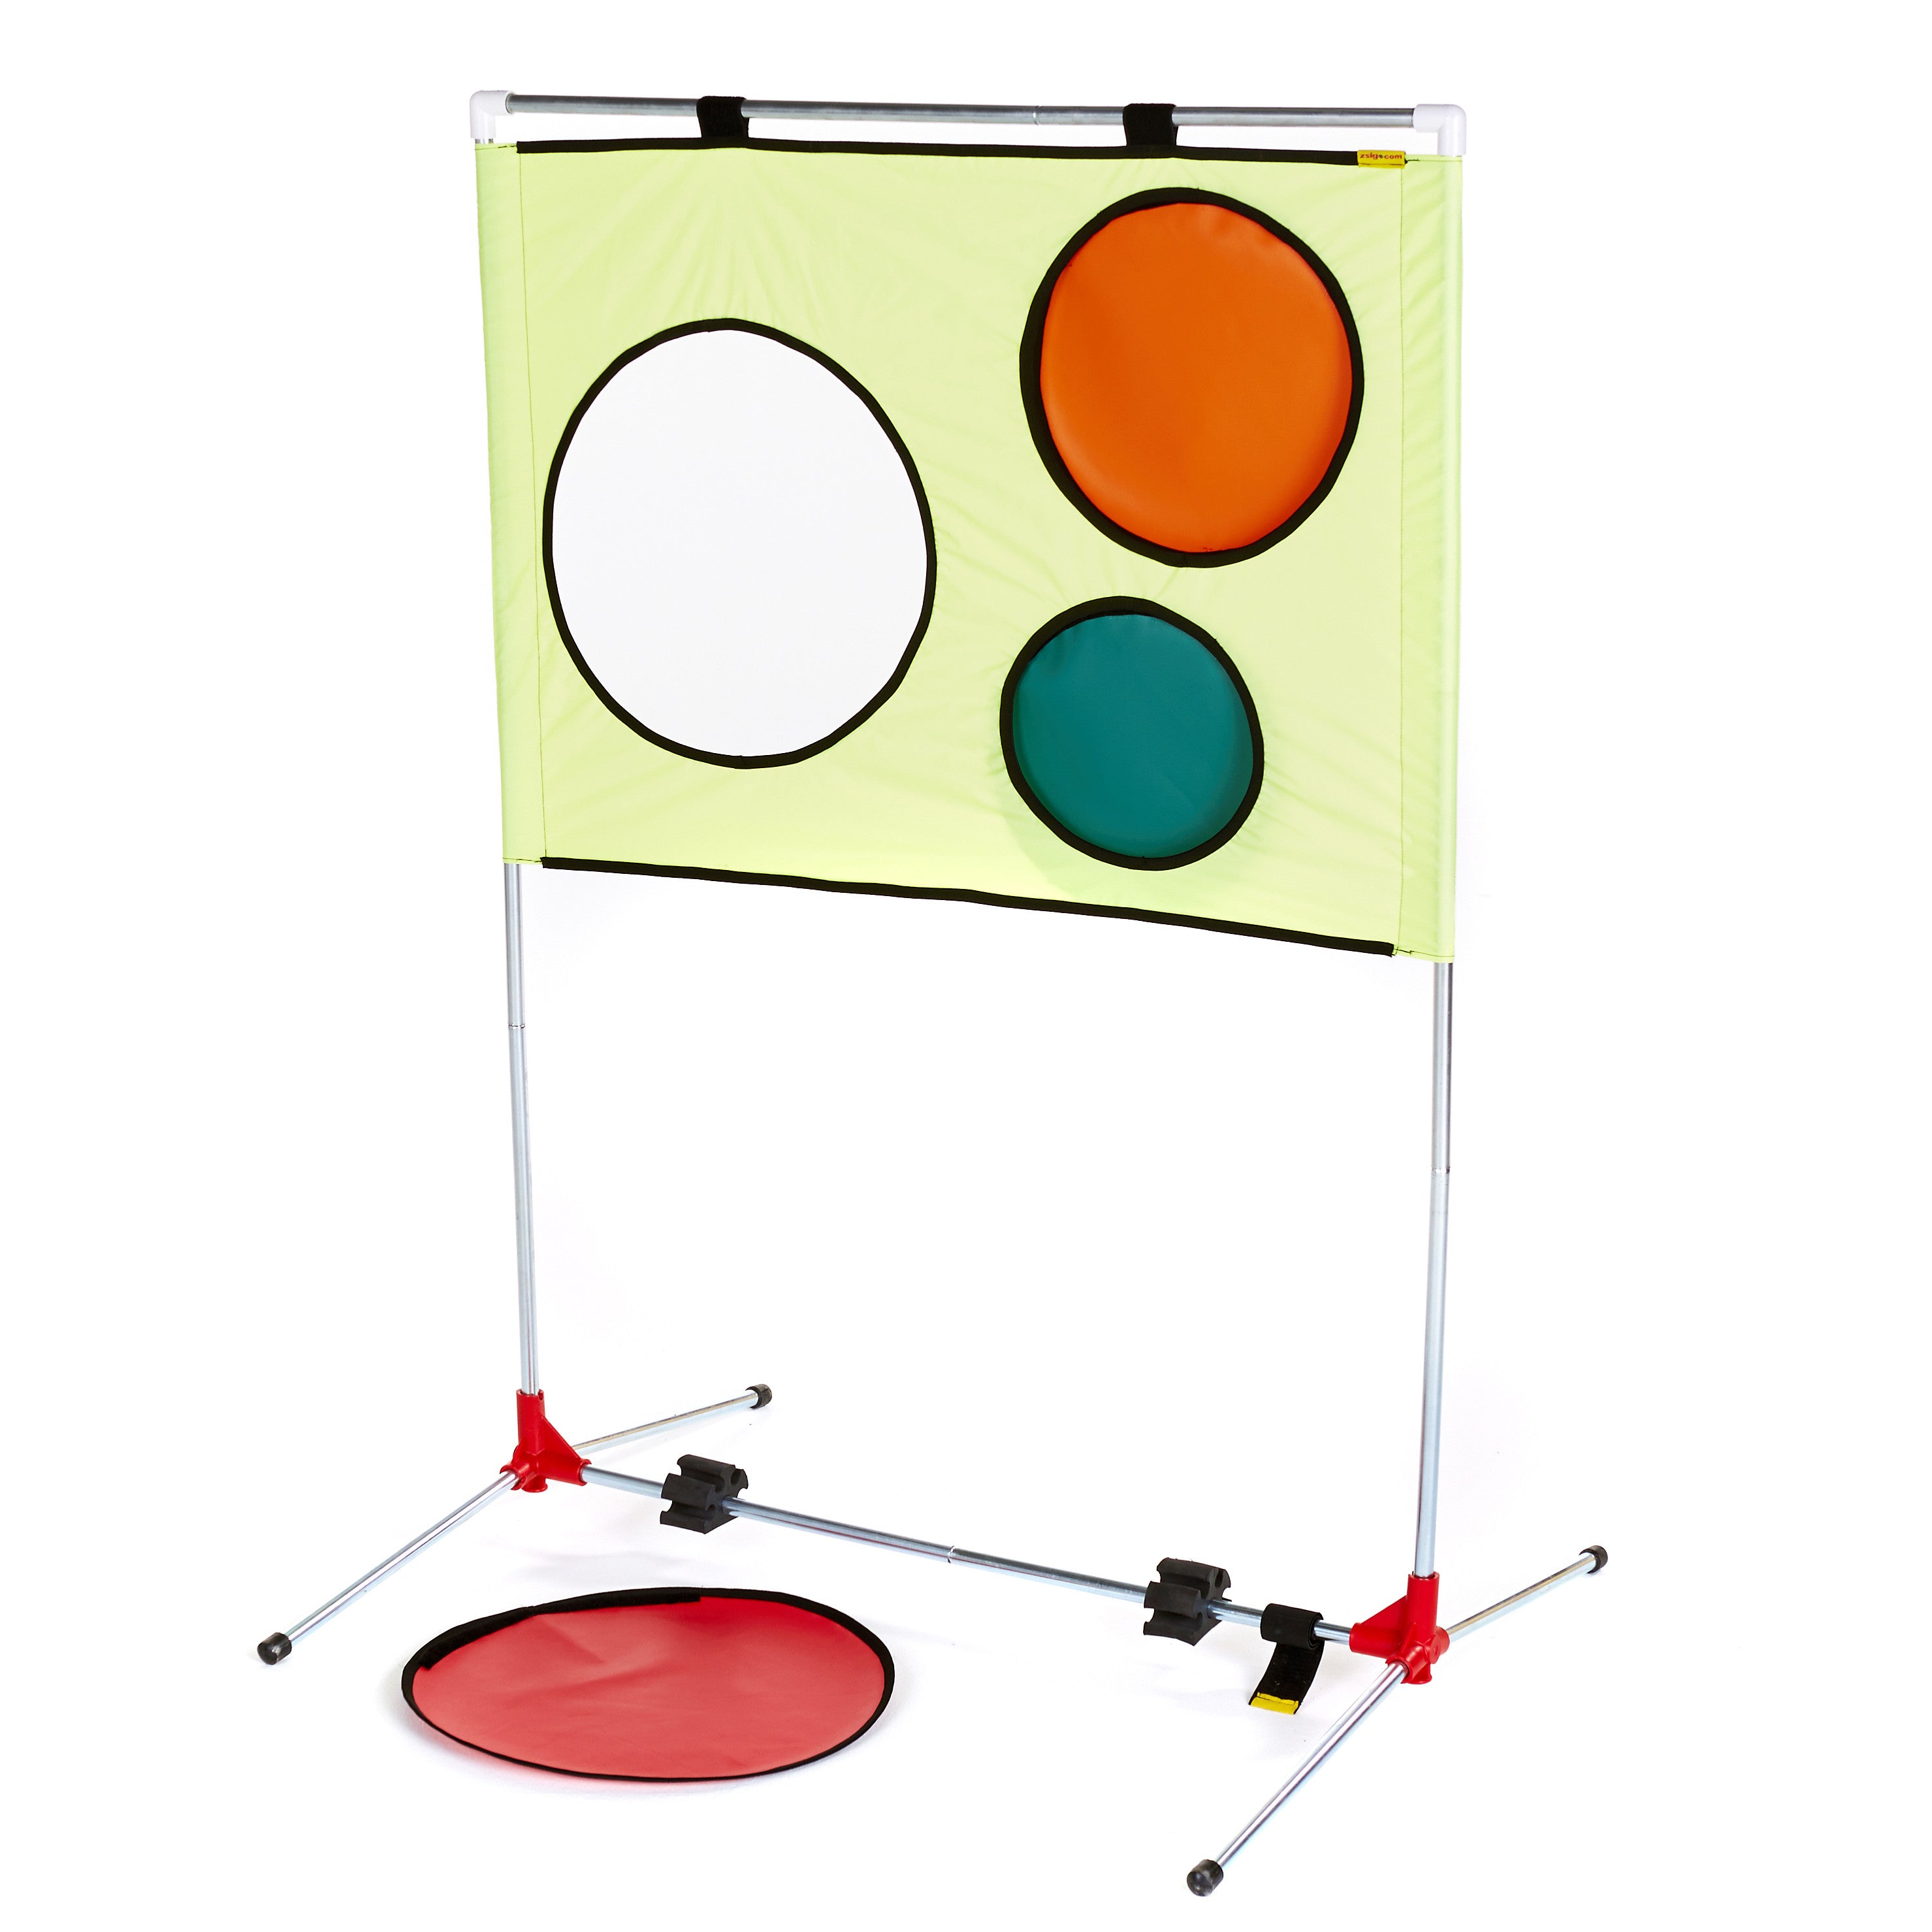 Tennis Coaching Aid. Portable frame with removable coloured spot targets.